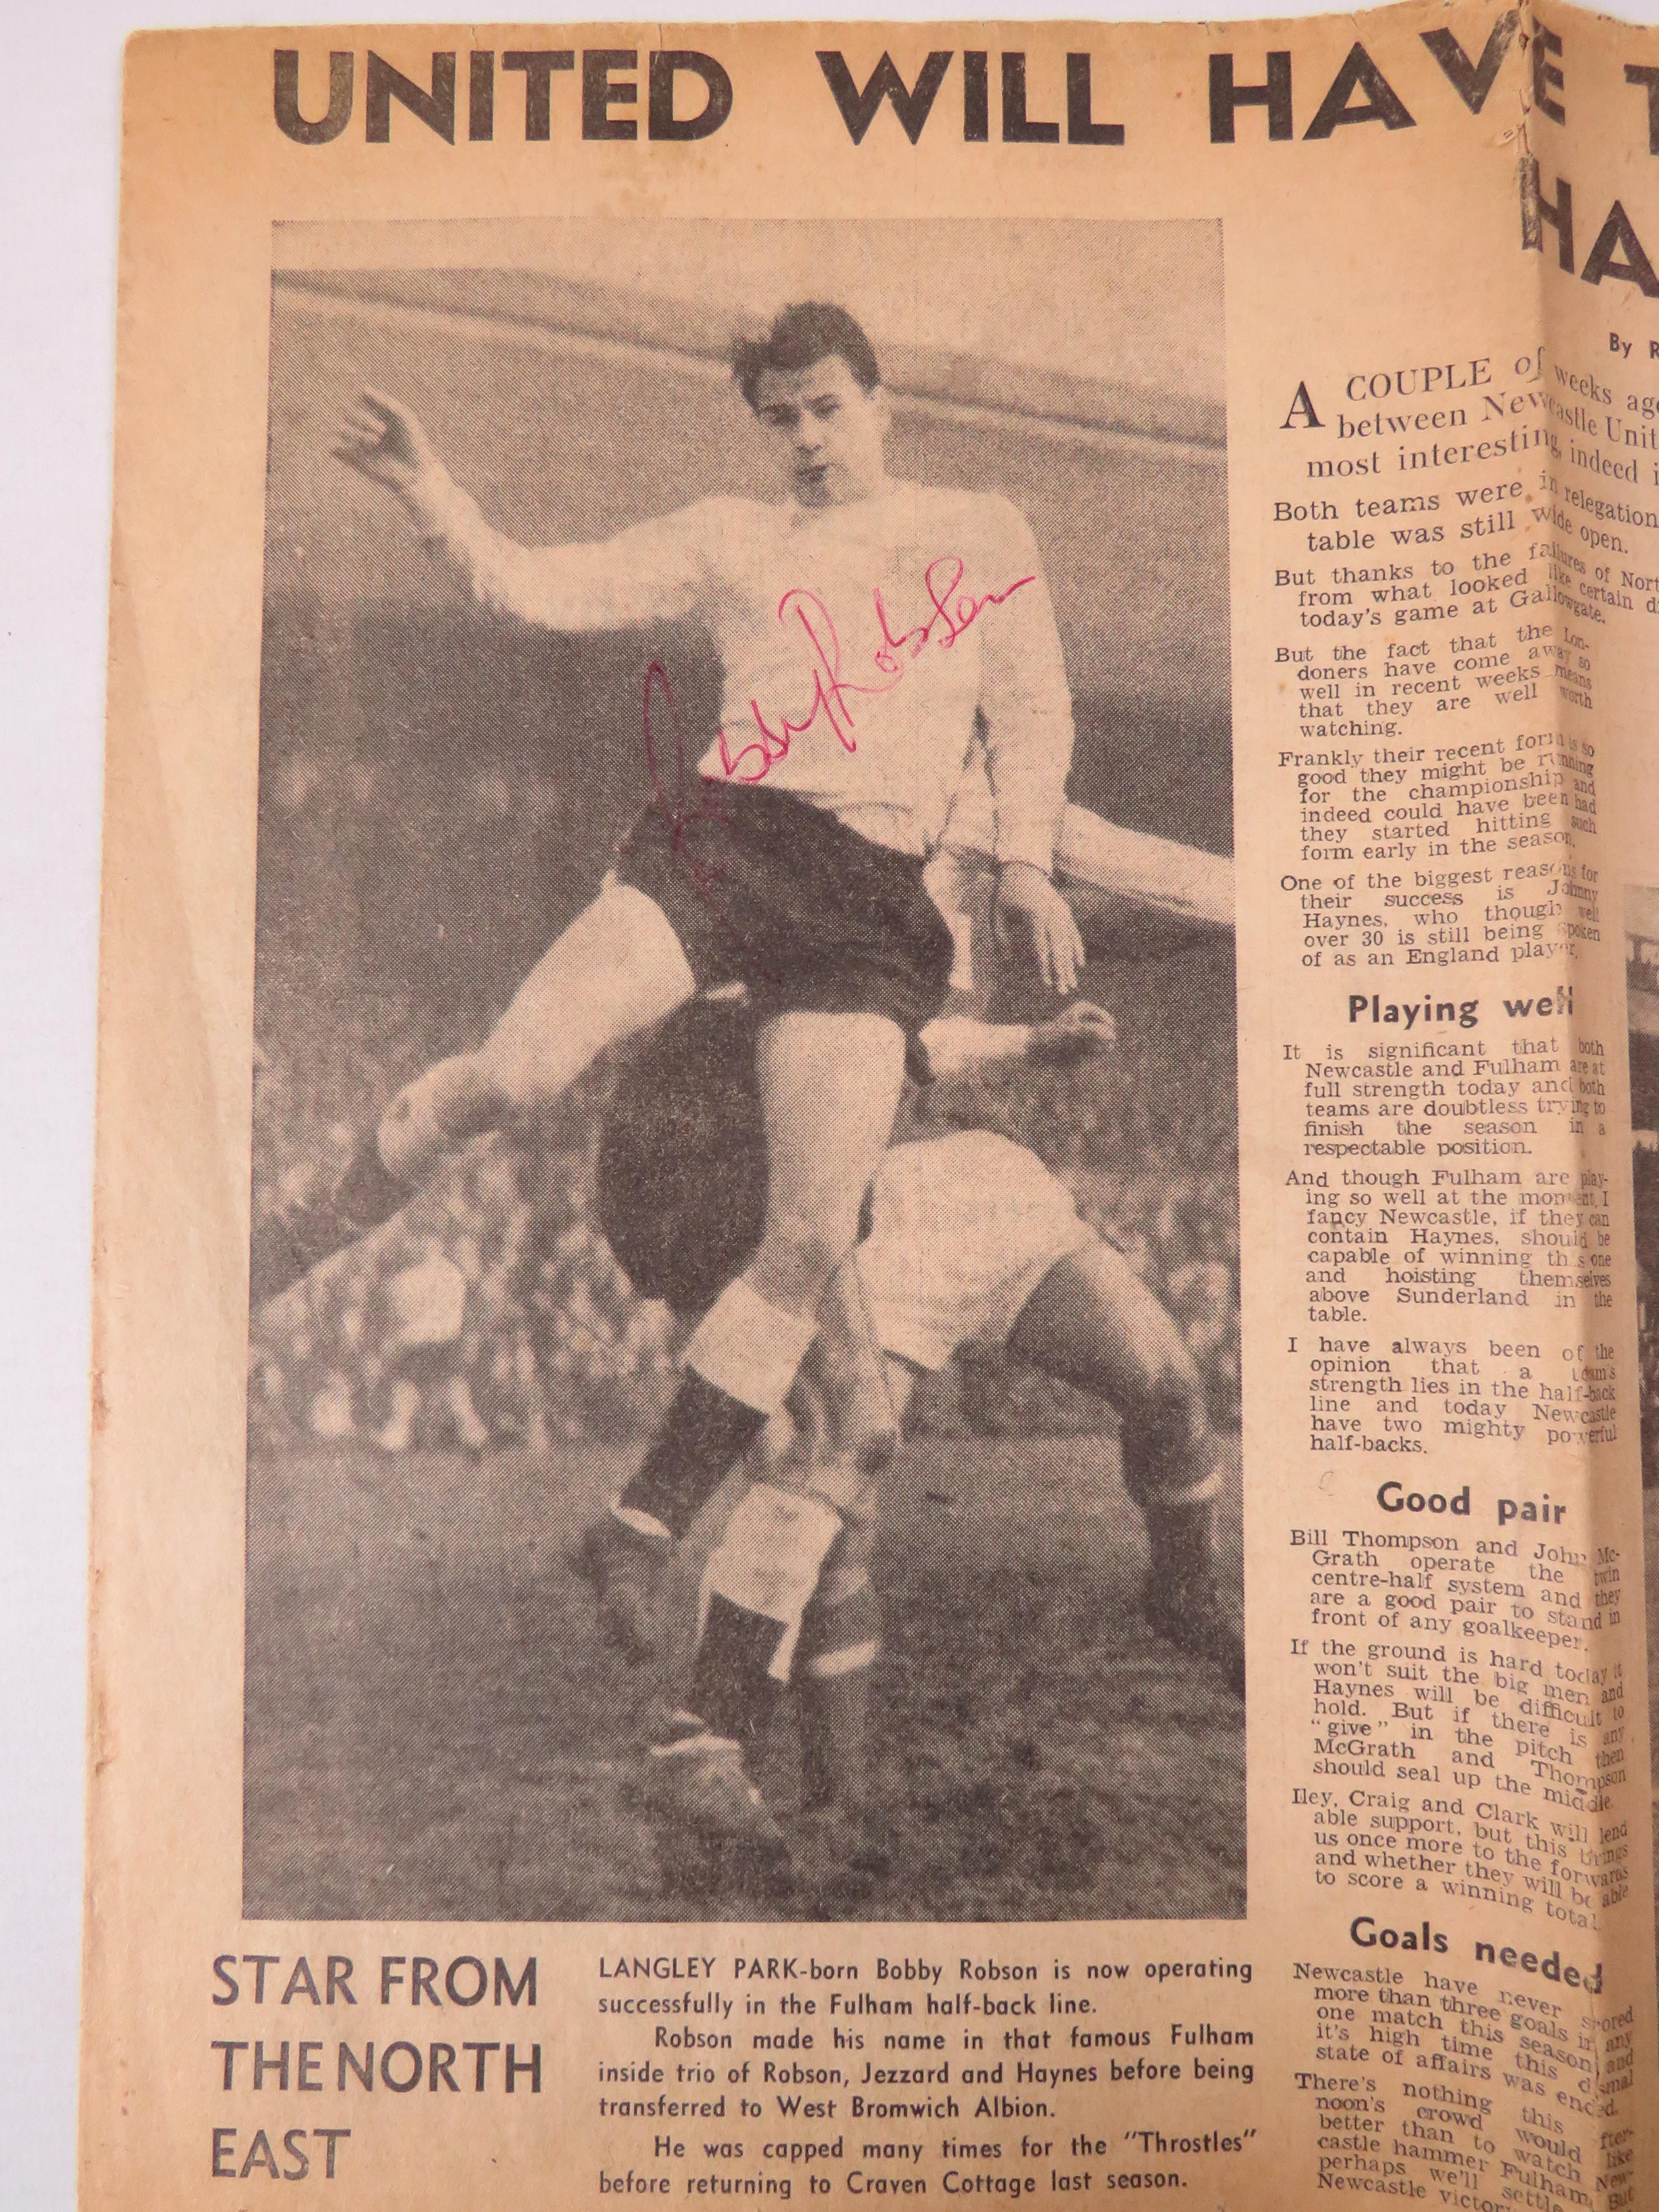 Sporting Magazines dating from 1950's, Newcastle United Match day programme from 1966 plus autograph - Image 3 of 11